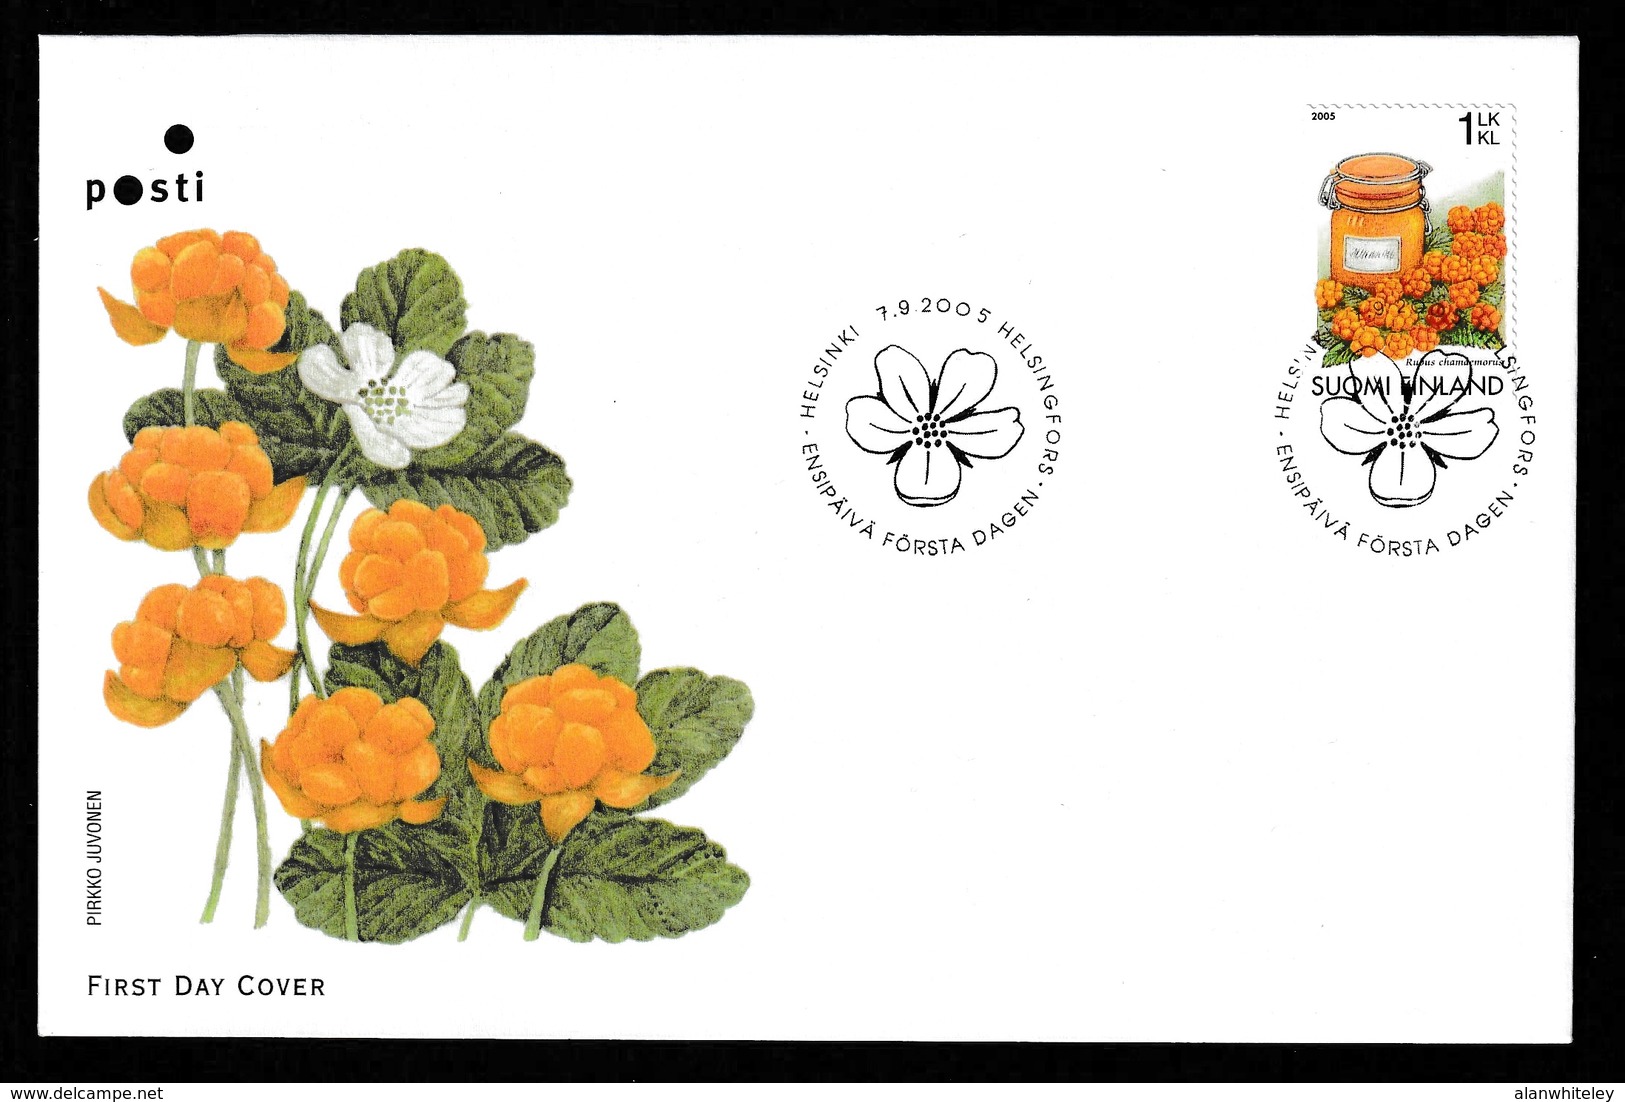 FINLAND 2005 Cloudberries: First Day Cover CANCELLED - FDC